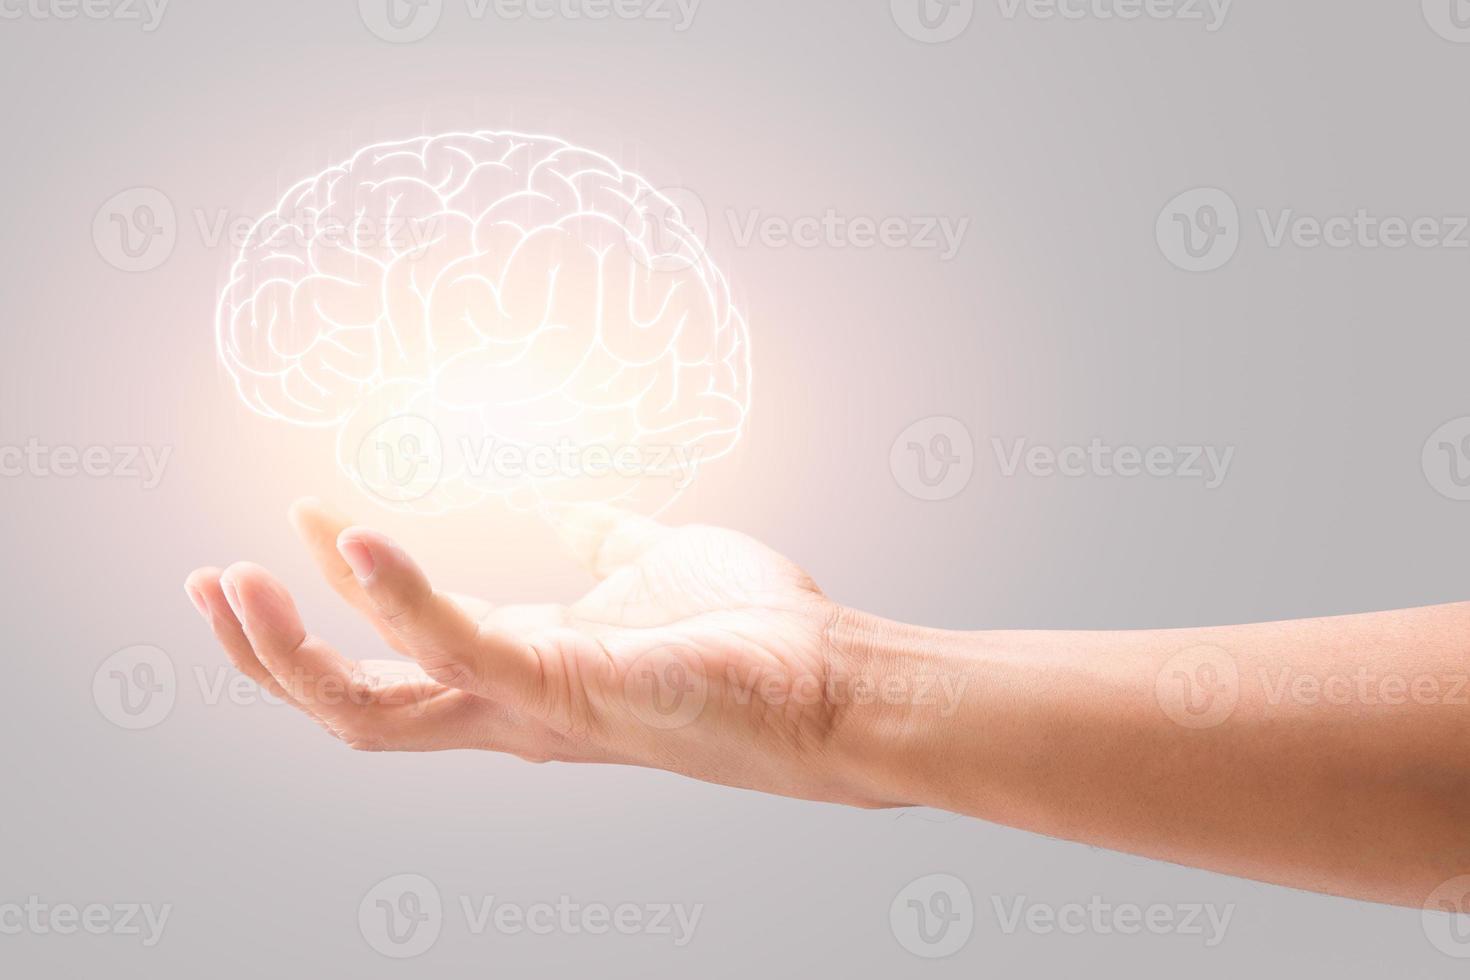 Mental health. Man holding brain illustration against gray wall background. photo